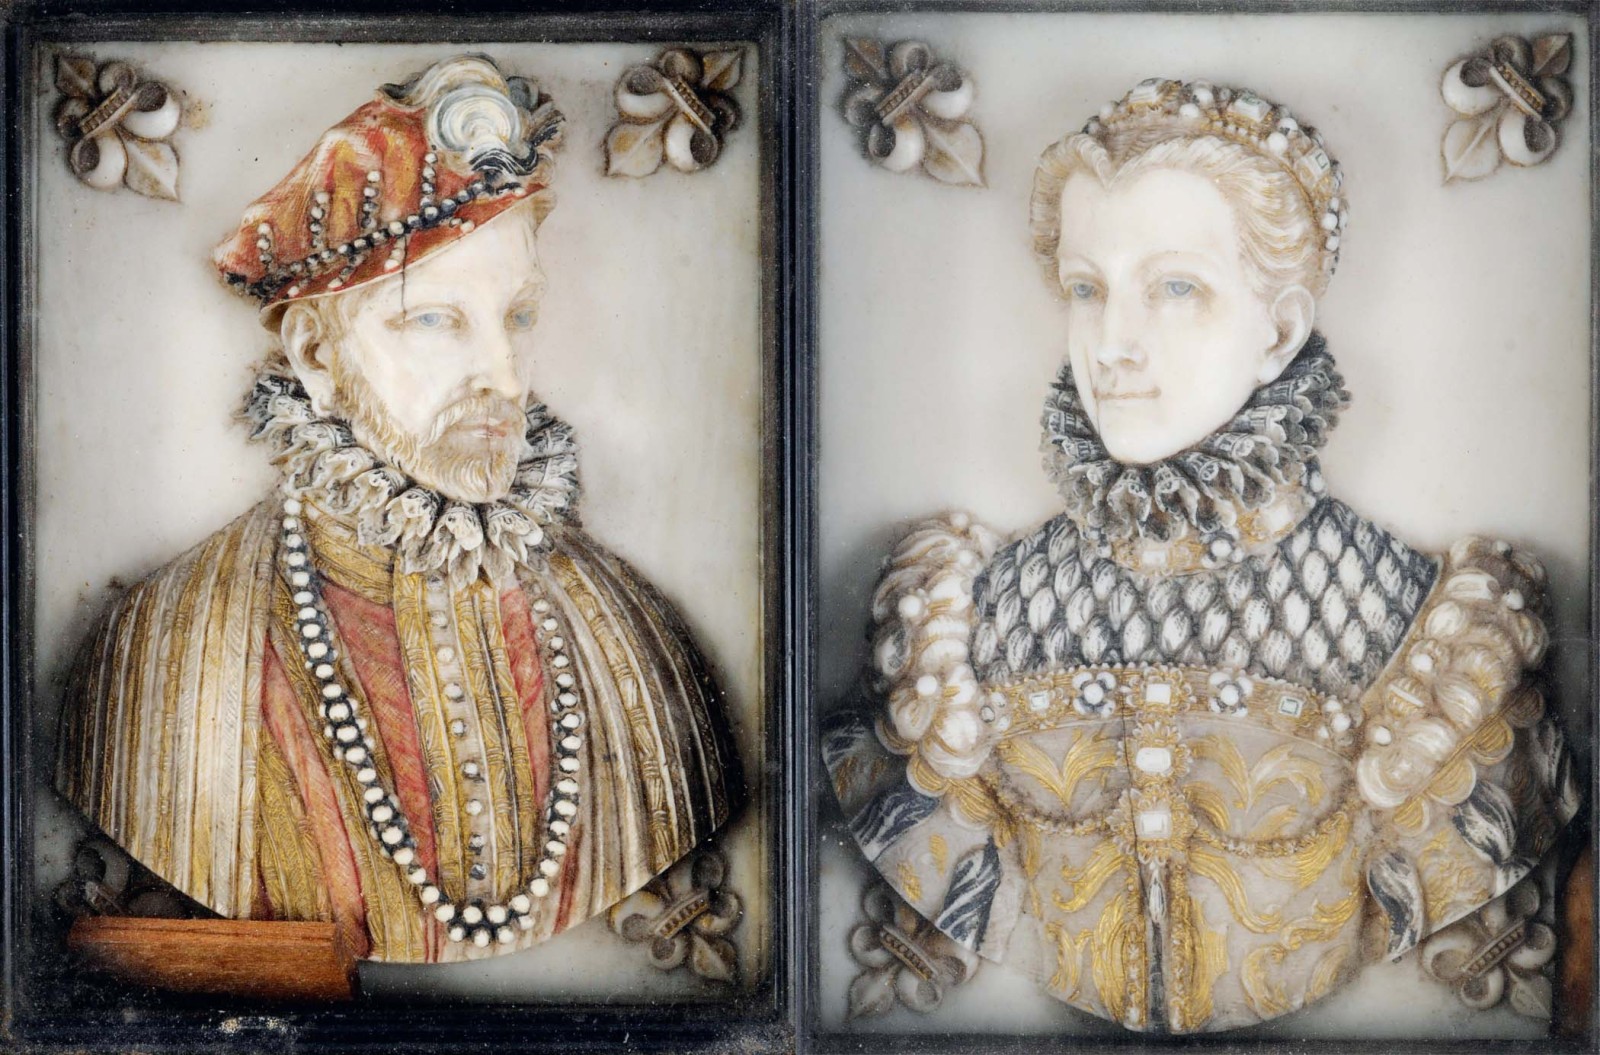 A PAIR OF IVORY PORTRAIT PLAQUES coloured & carved in relief with a portrait of Charles IX of France